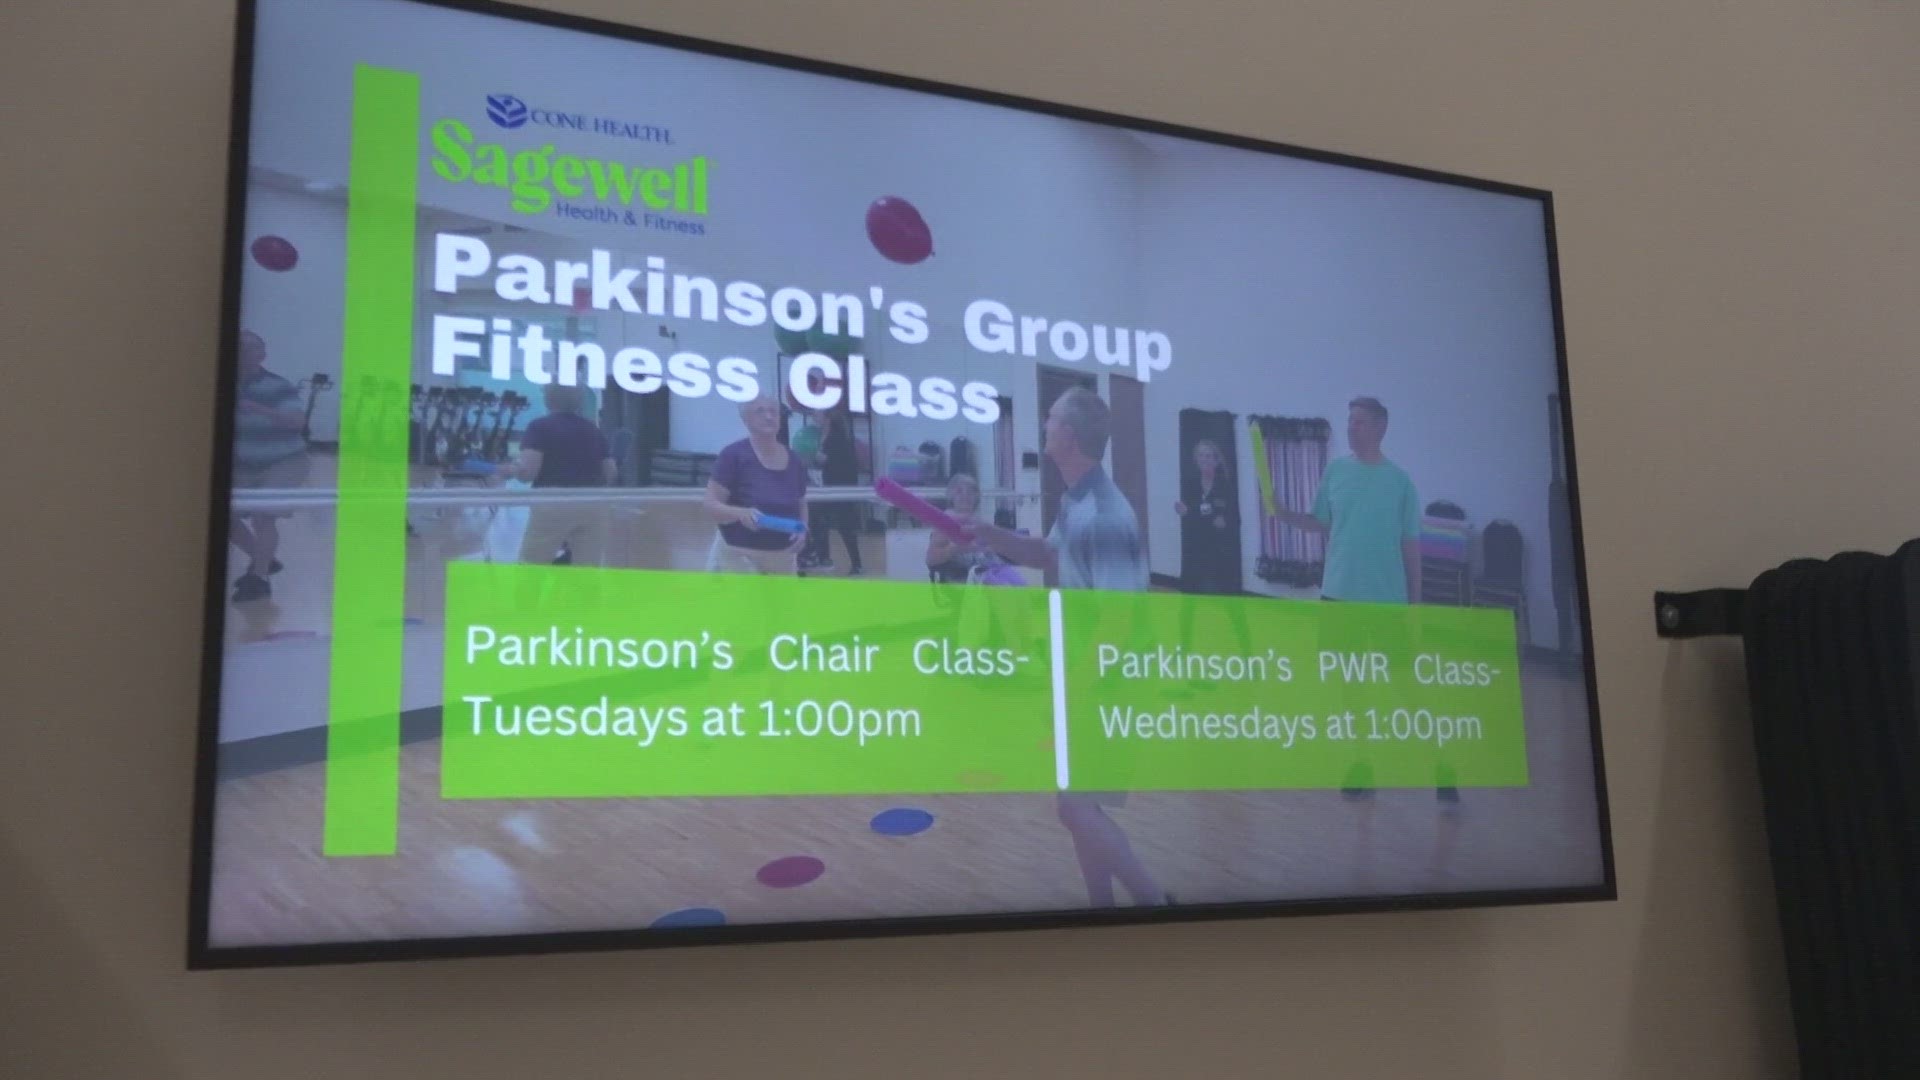 Parkinson’s disease isn’t stopping these people from getting exercise.